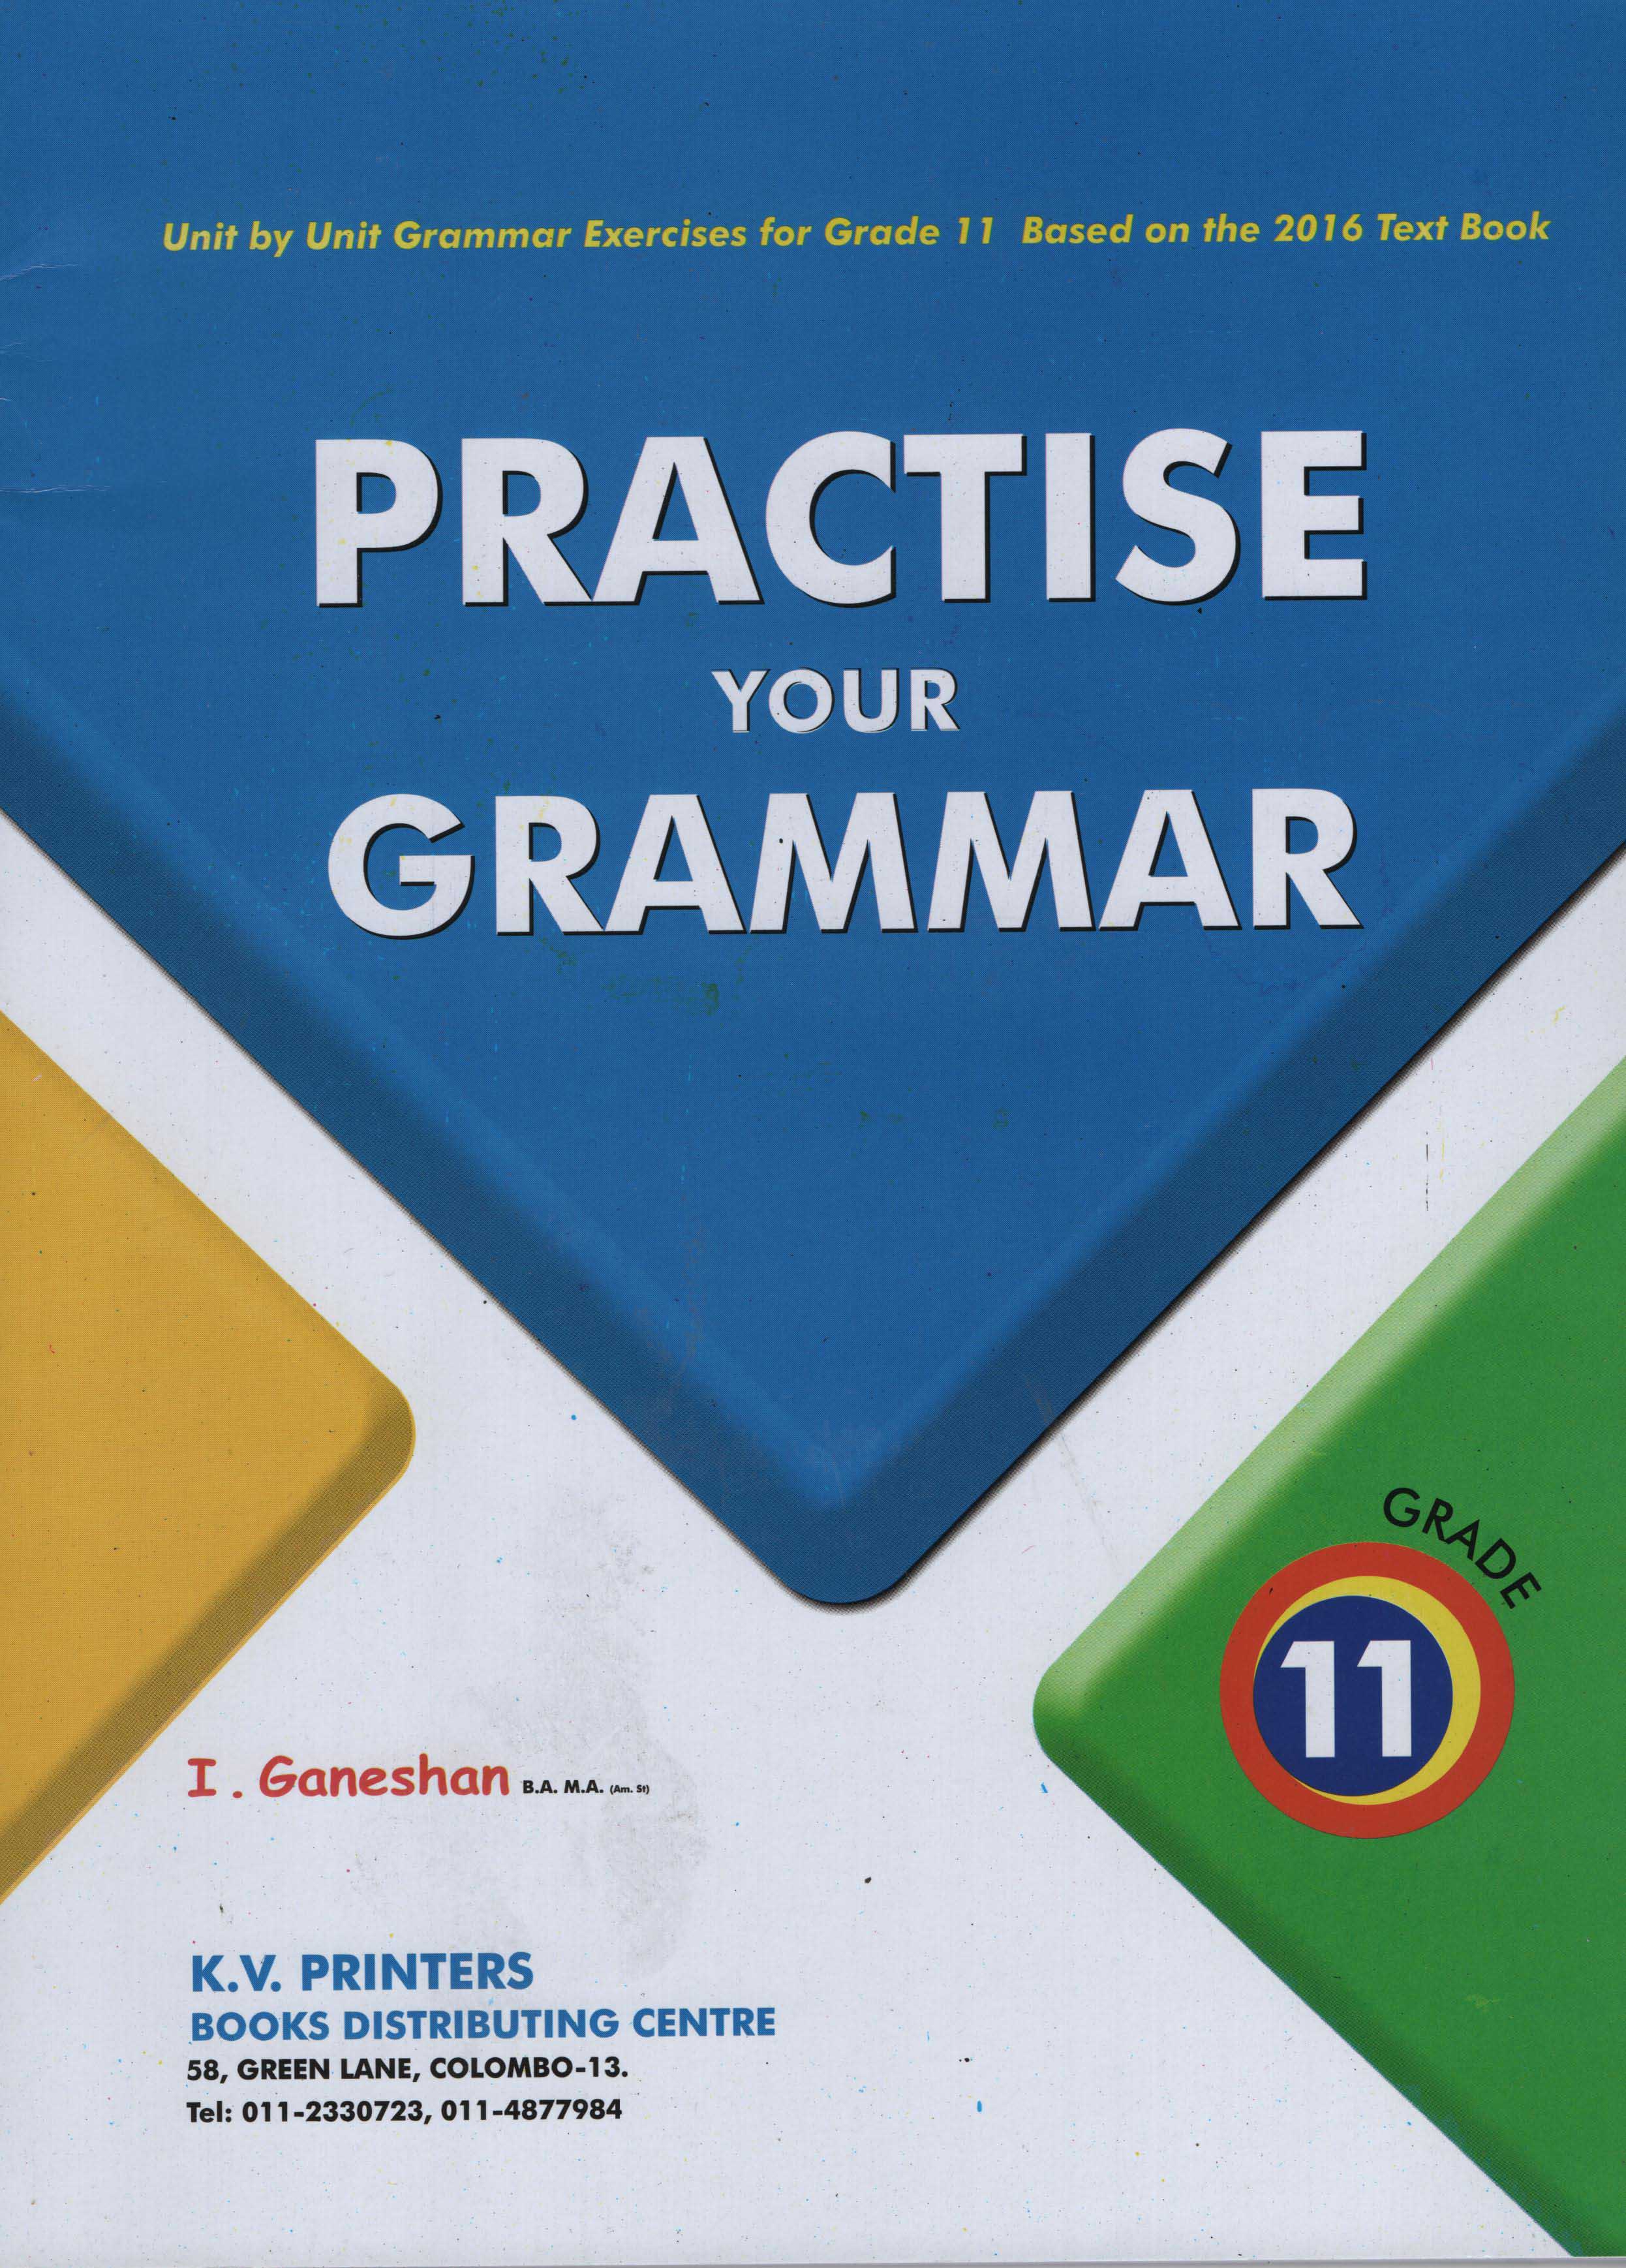 Practise Your Grammar for Grade 11